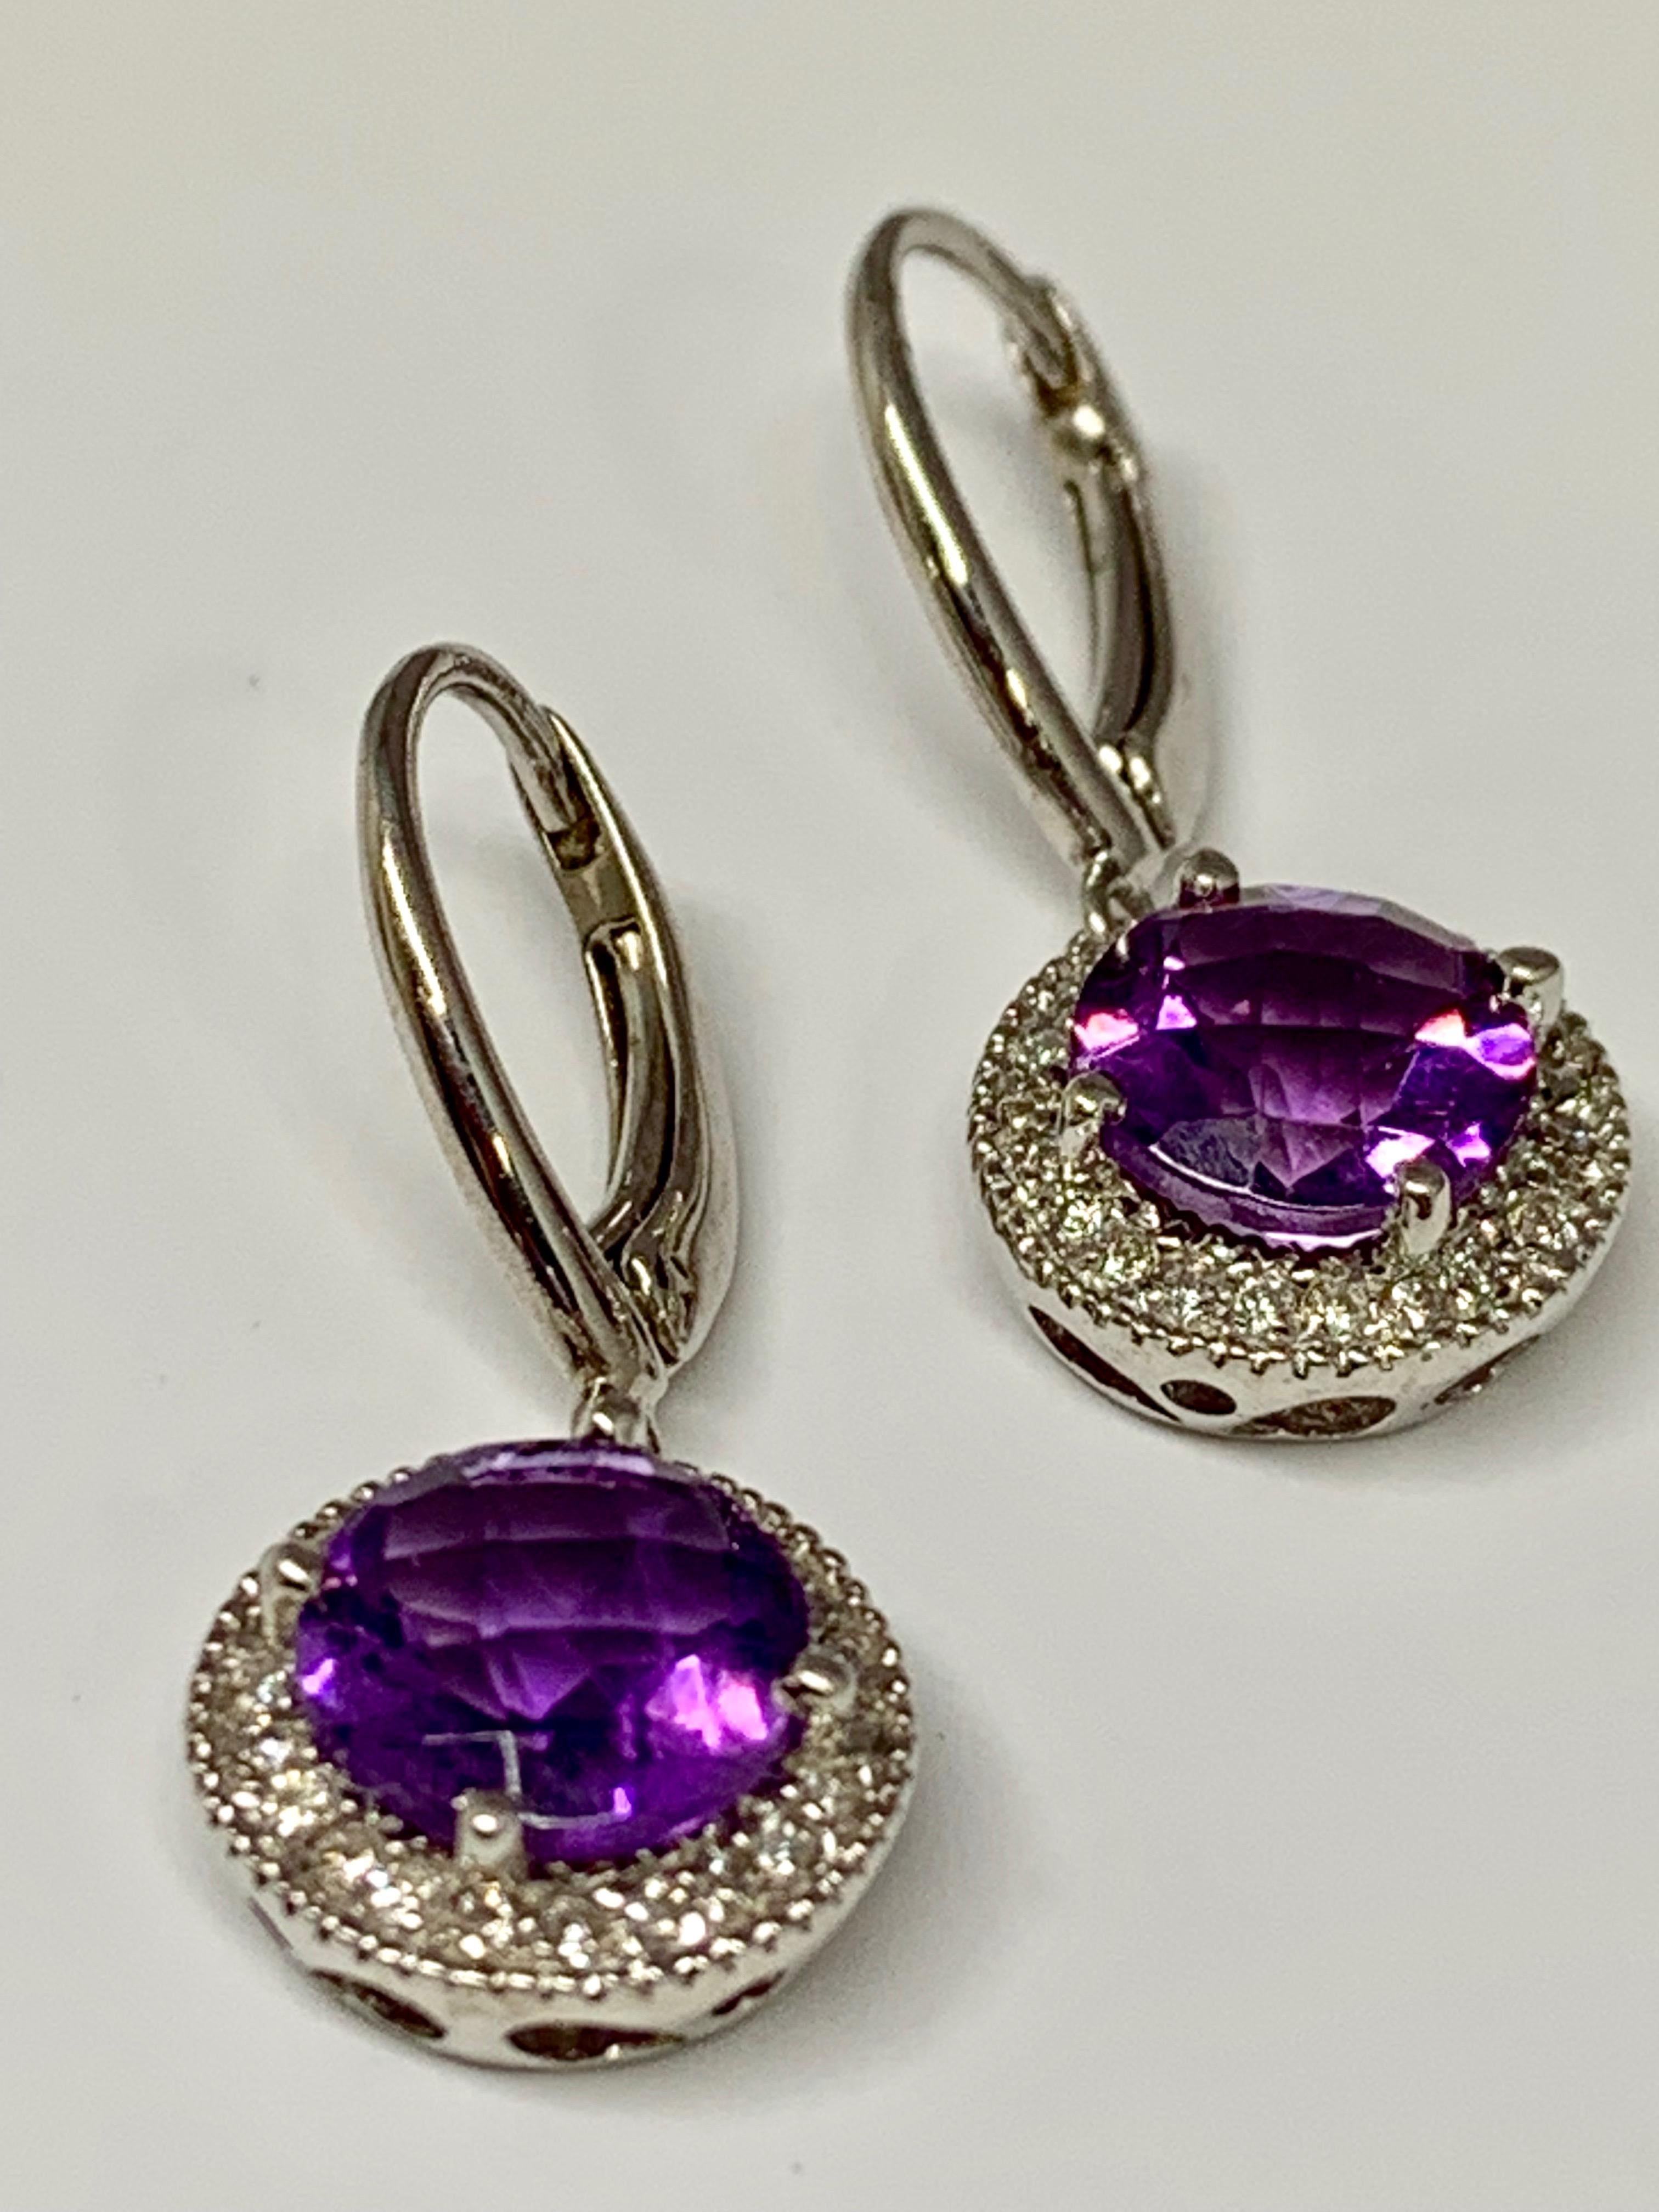 These 14K white gold lever-back earrings hold a 1.04 carat round checkerboard cut amethyst each, for a total amethyst weight of 2.08 carats. Surrounding each amethyst is a micro pave diamond halo holding 0.08 carats of round white diamonds each. The